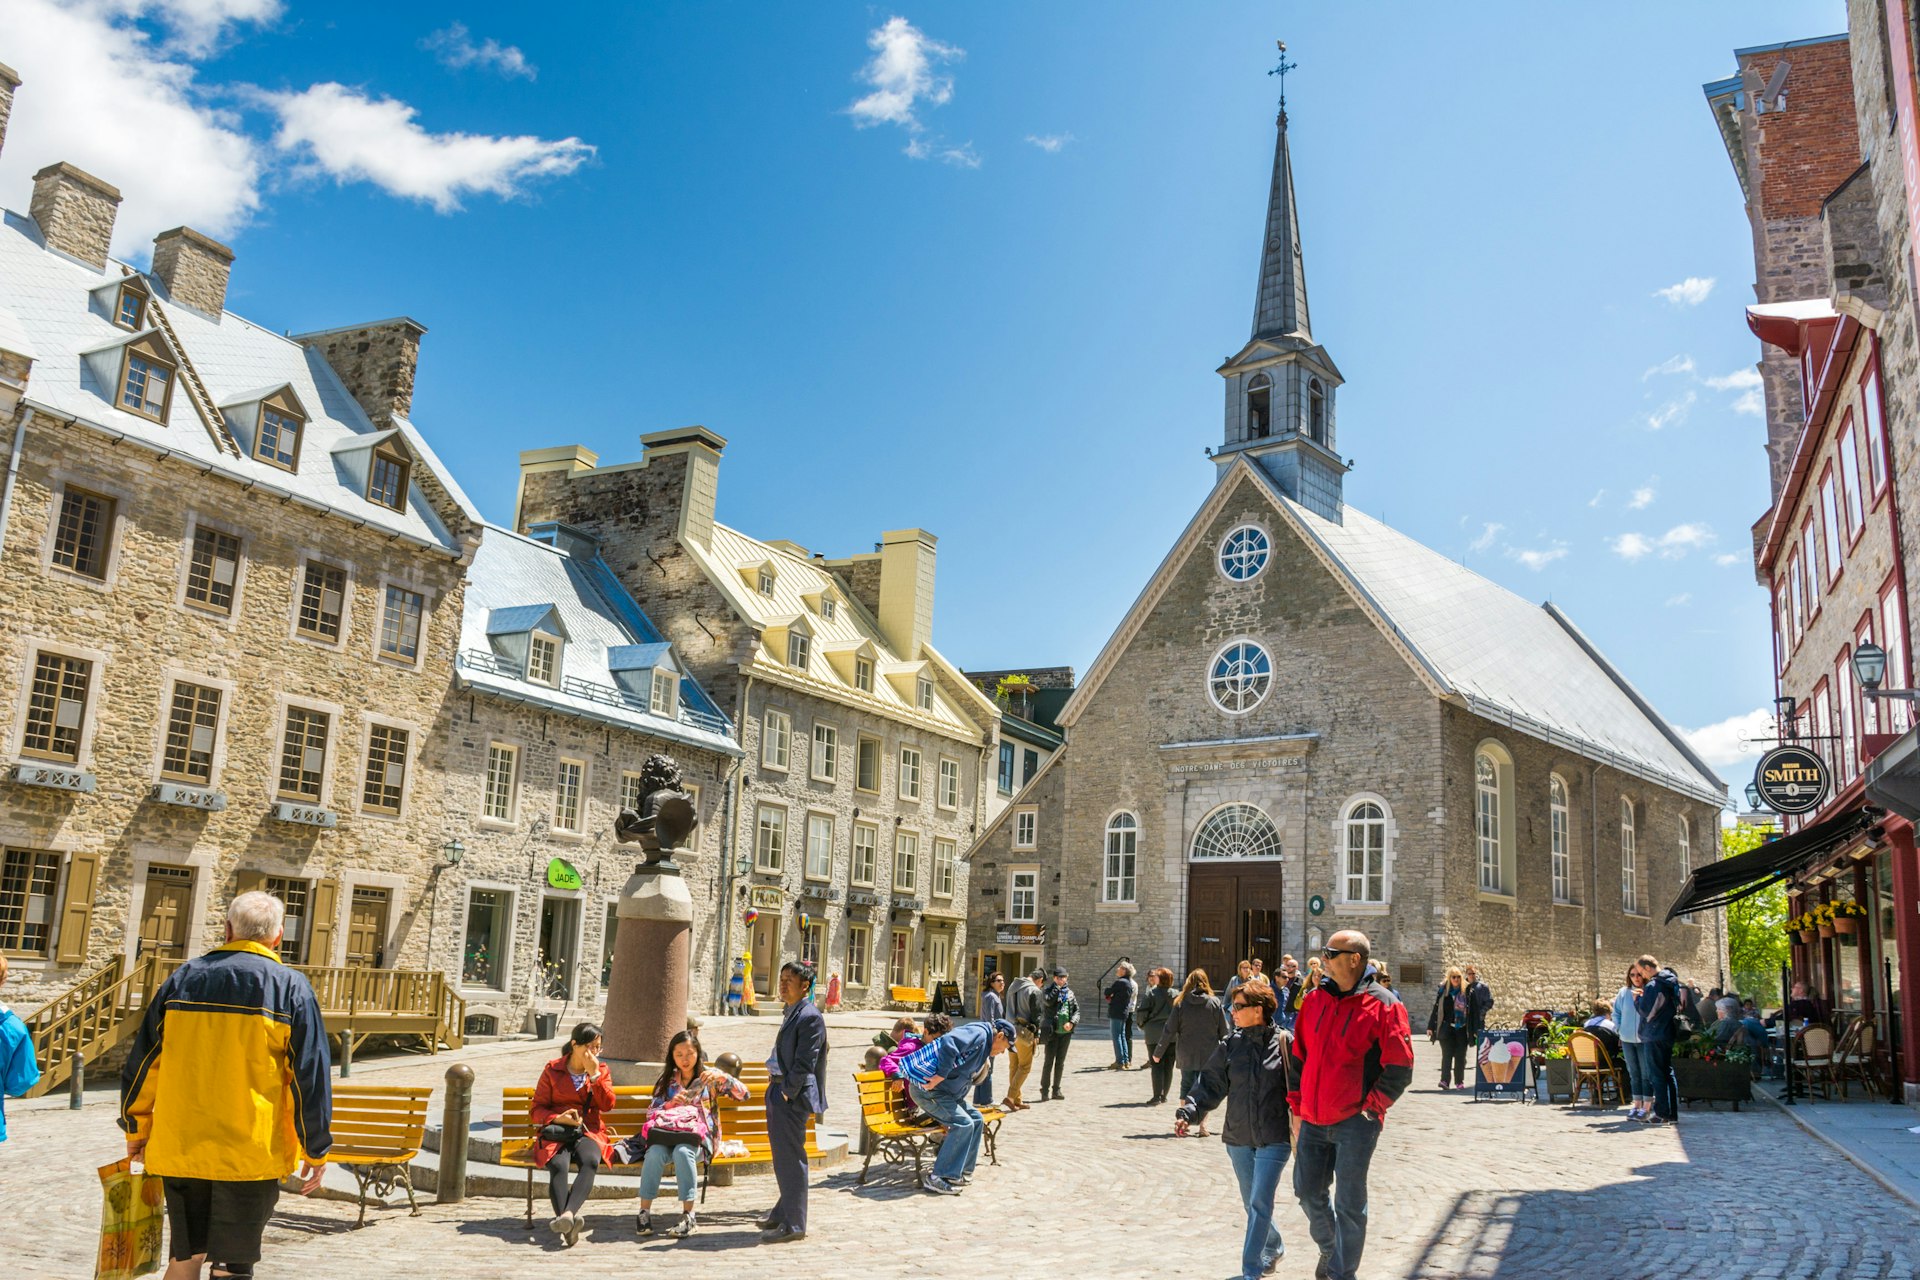 People walk through a square in front of Notre-Dame-des-Victories church in Vieux Québec (Old Town), Québec City, Québec, Canada, North America